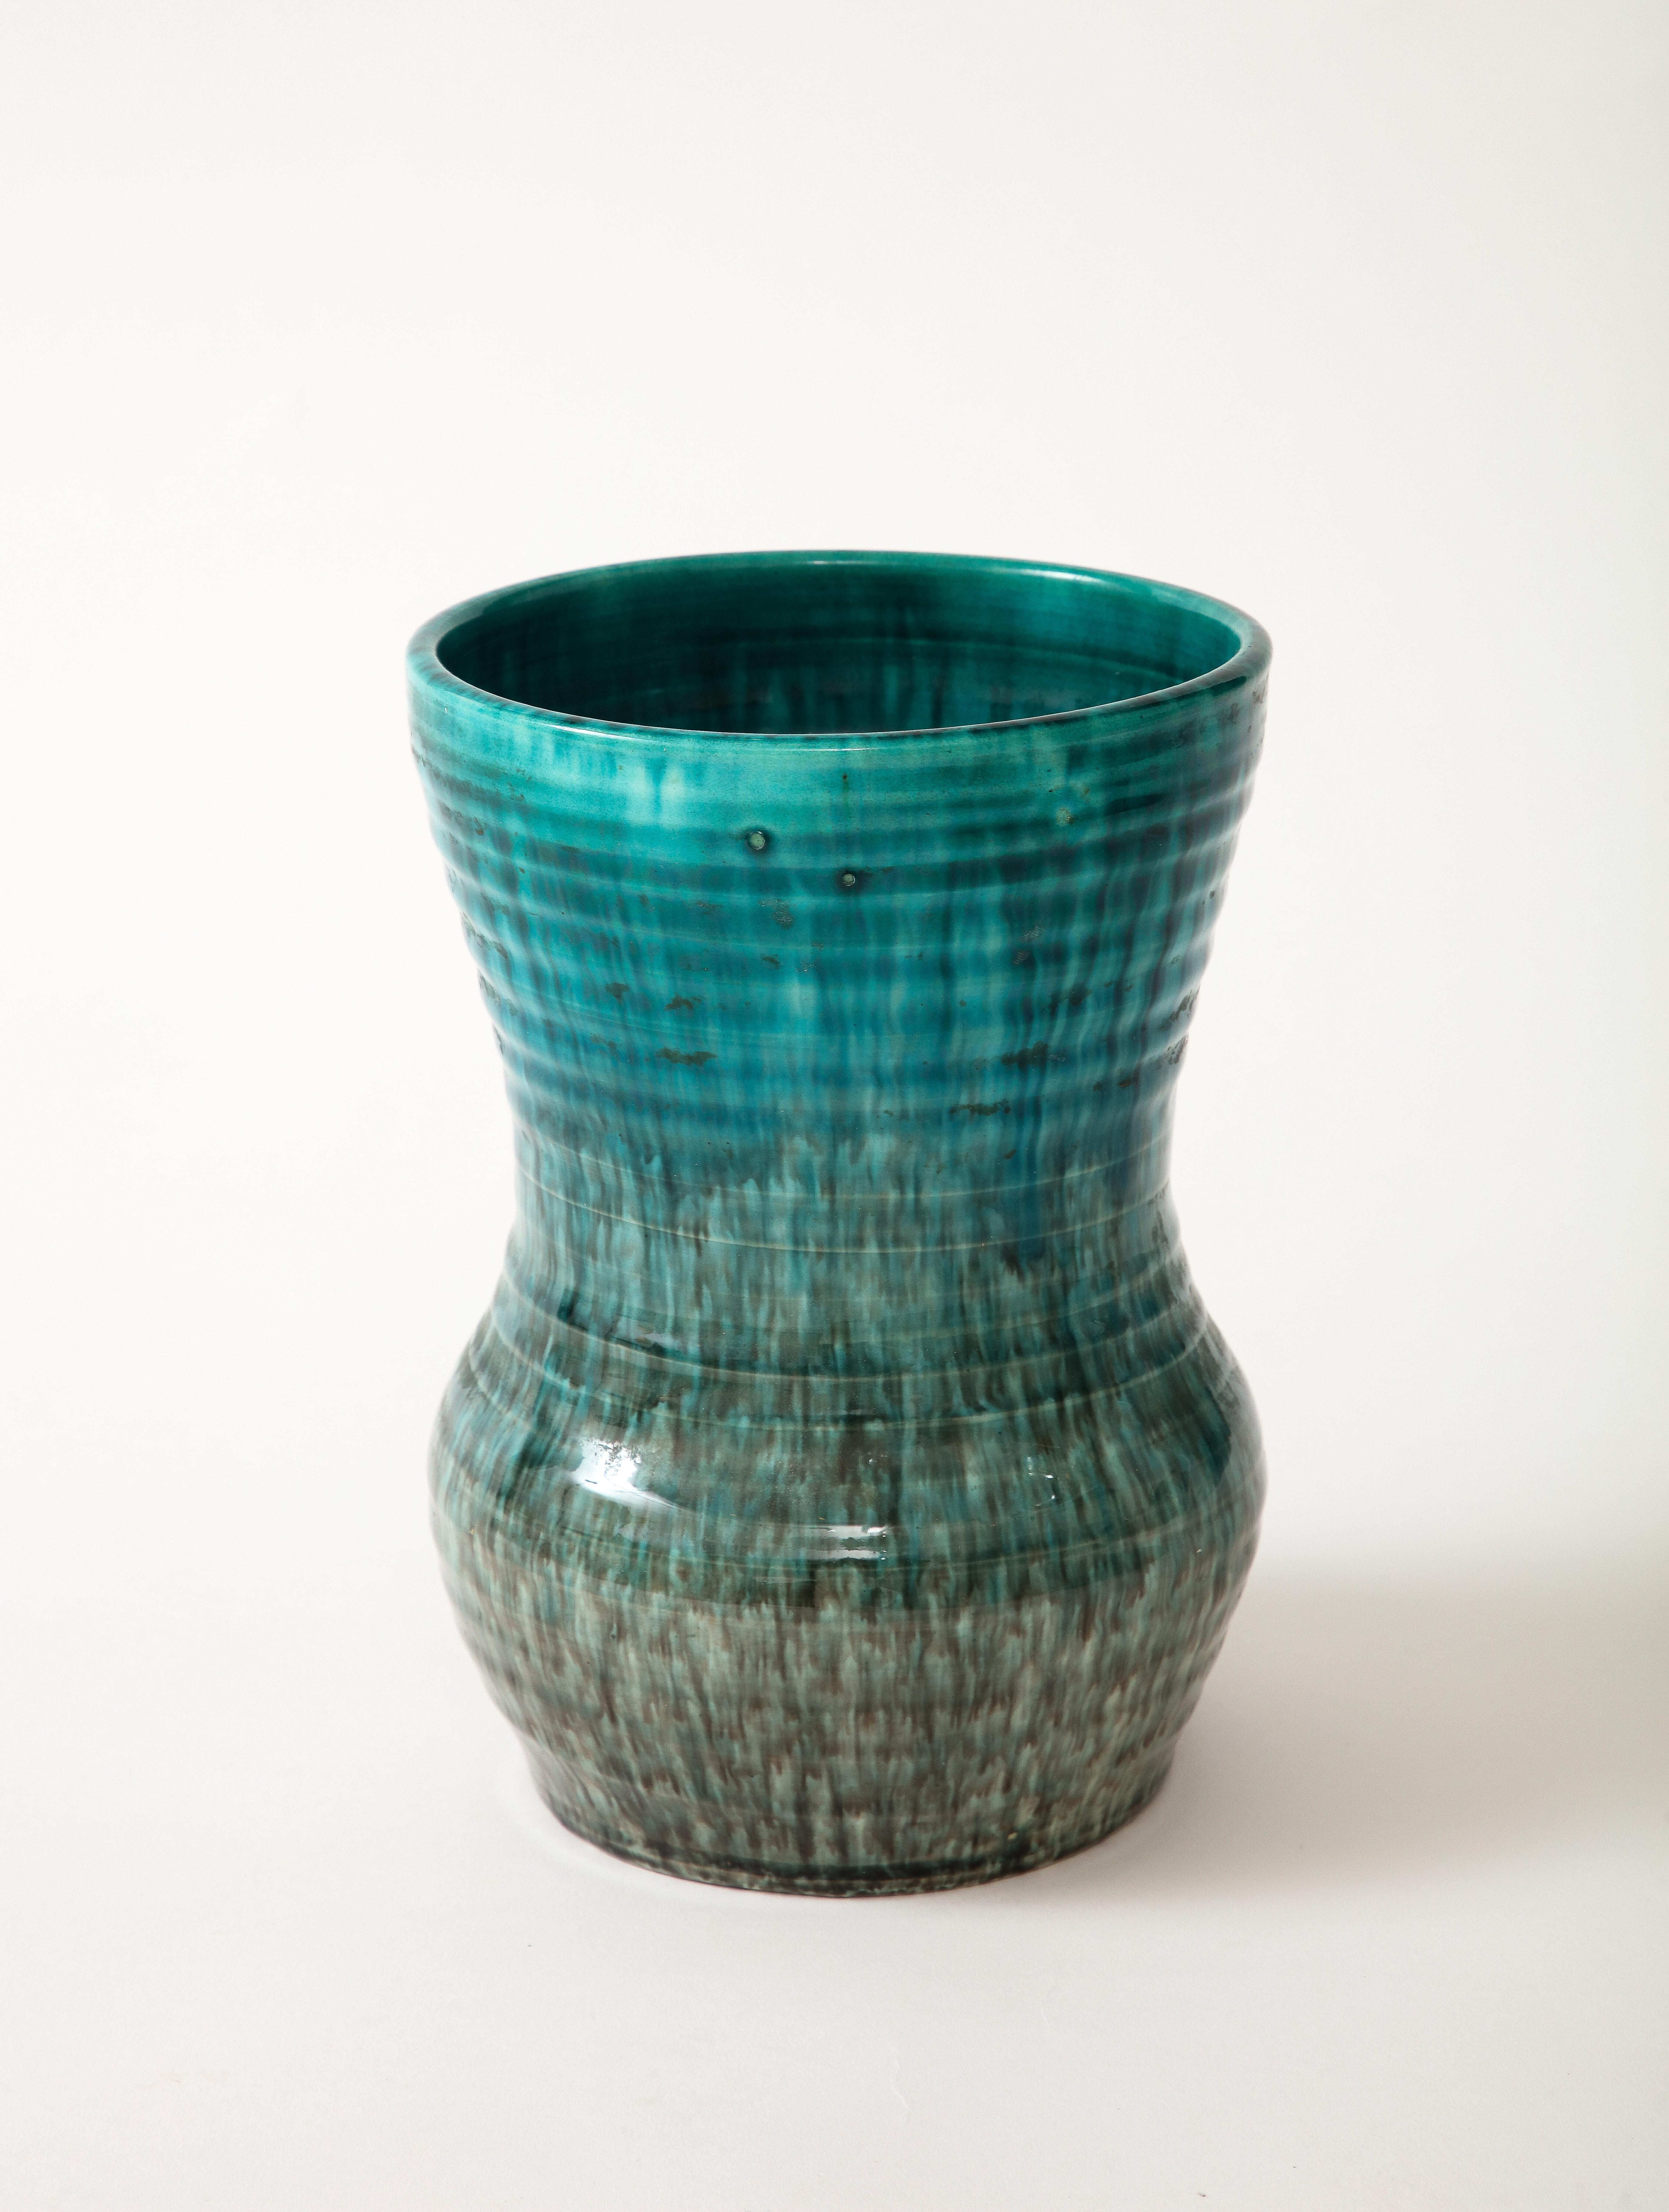 A ceramic vase in a beautiful glaze of shades of green and turquoise produced by Accolay Pottery. Founded in the 1950s in Accolay, France, the Accolay studio became well known after it produced buttons for the collection of Christian Dior. One of